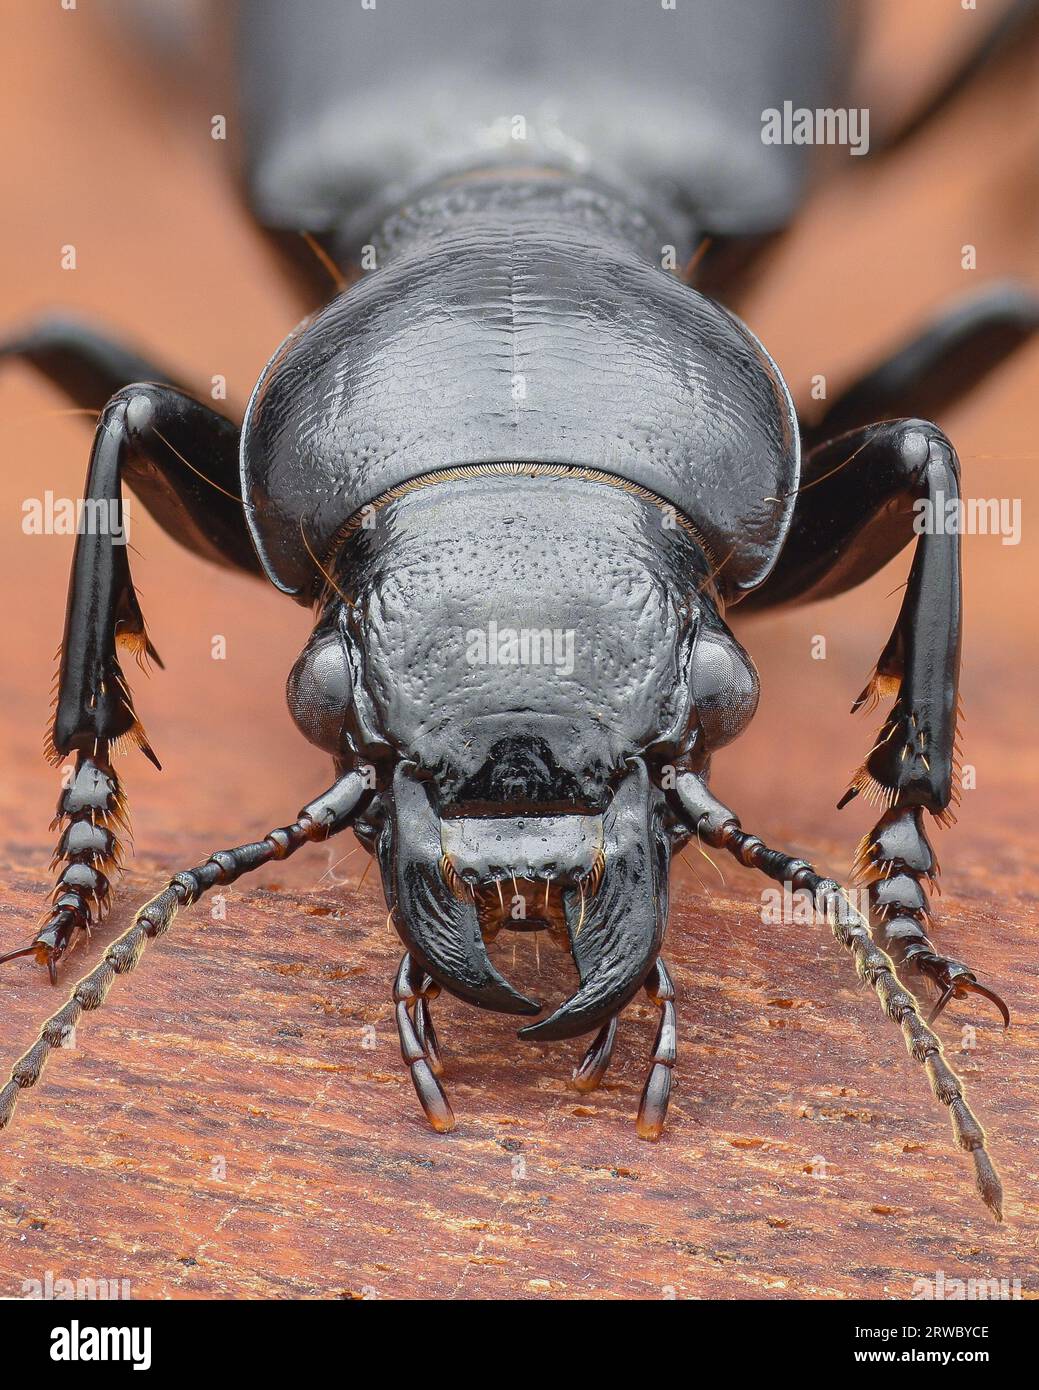 Portrait of a black and shiny Ground Beetle, standing on bark (Broscus cephalotes) Stock Photo